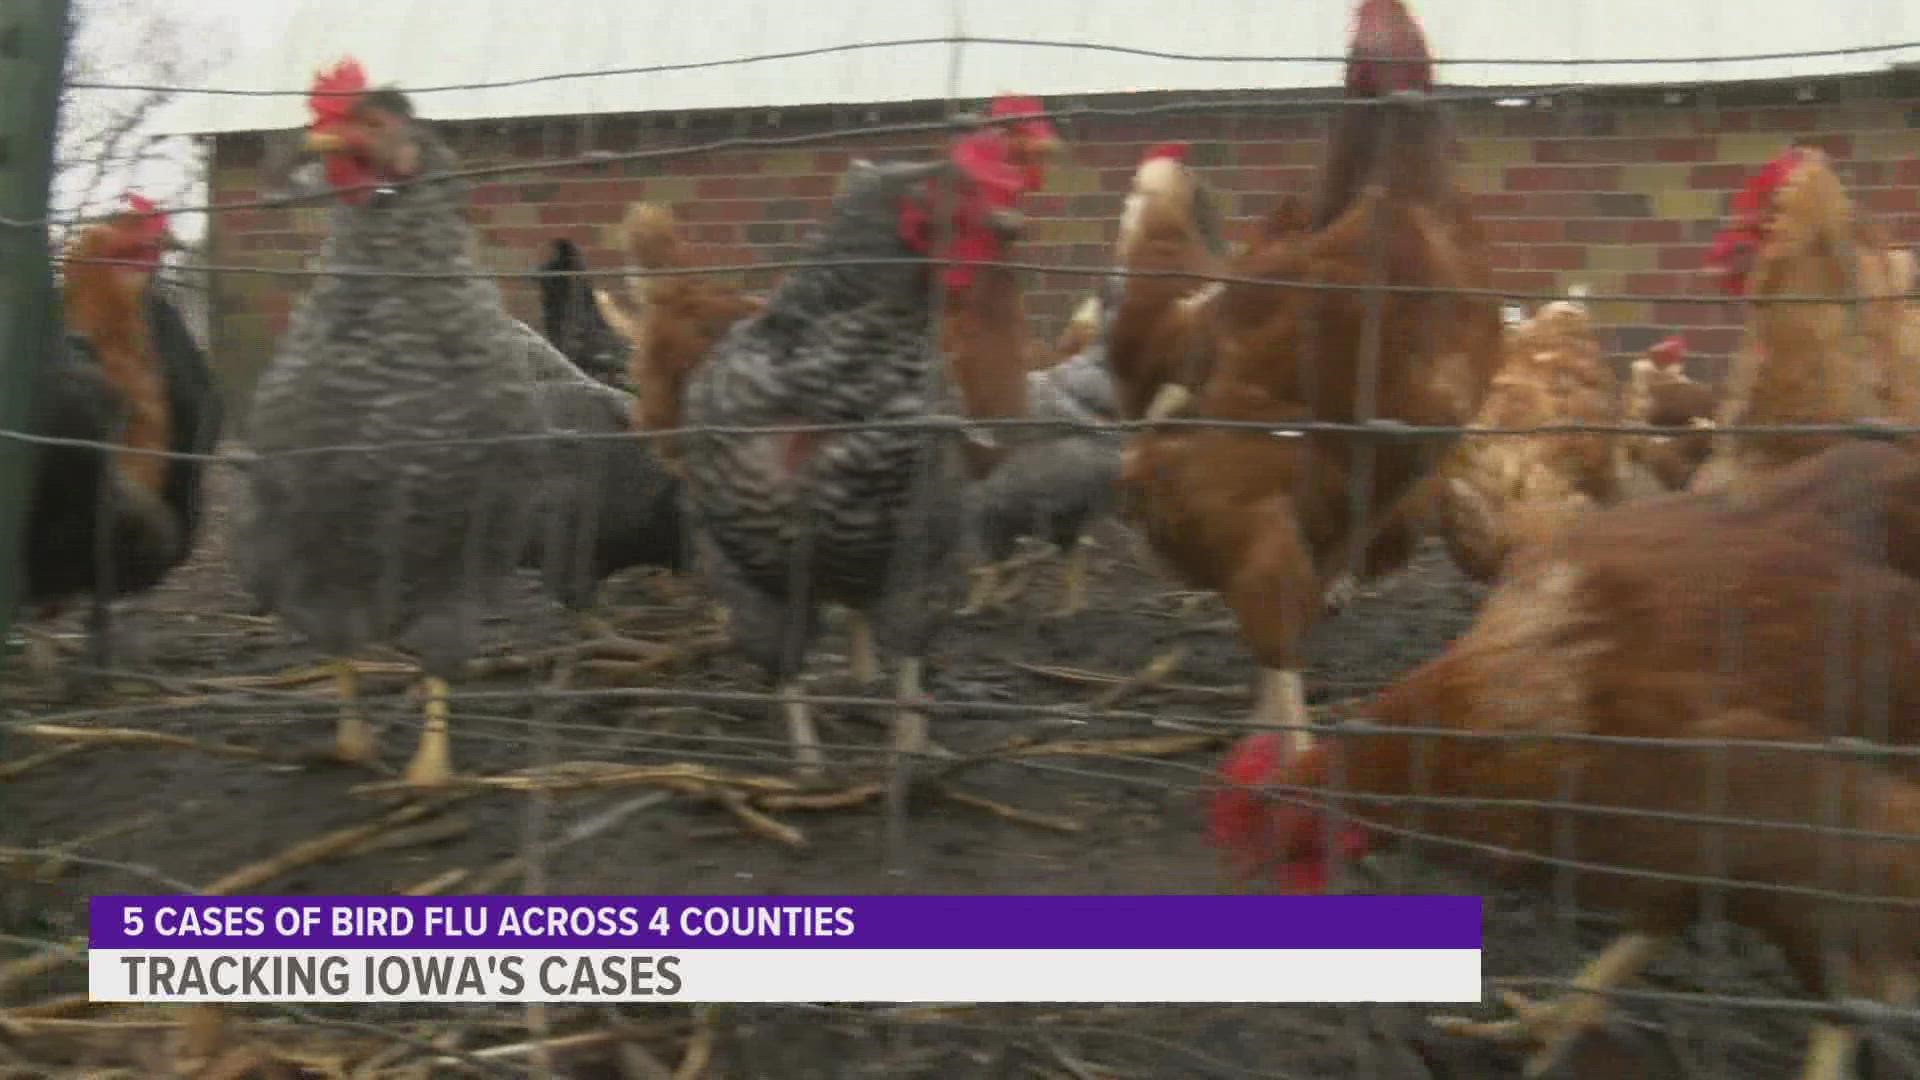 Five cases of the virus have been found in four counties across Iowa.